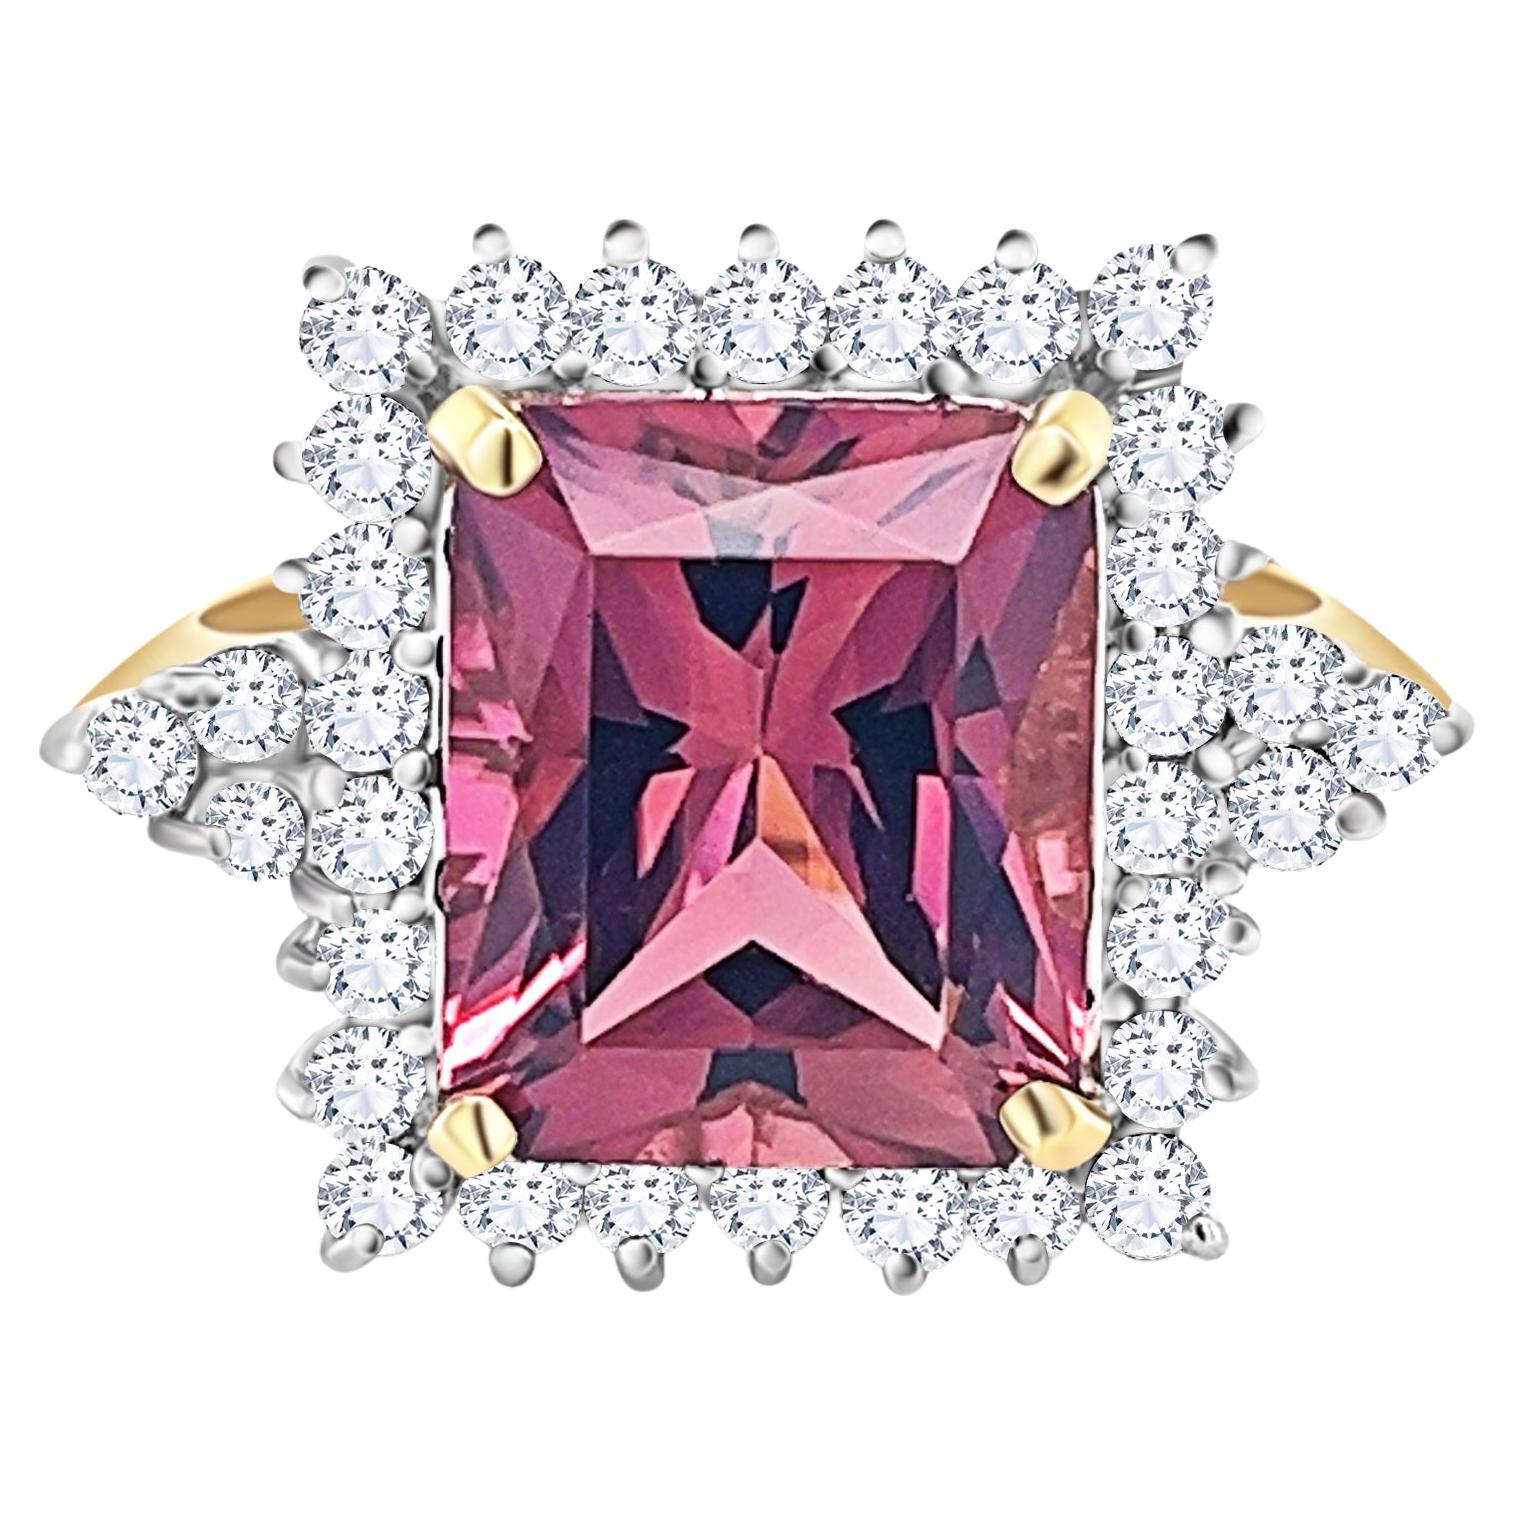 Natural Vivid Pink 7 Carat Radiant Cut Tourmaline Ring With Diamonds in 18K Gold For Sale